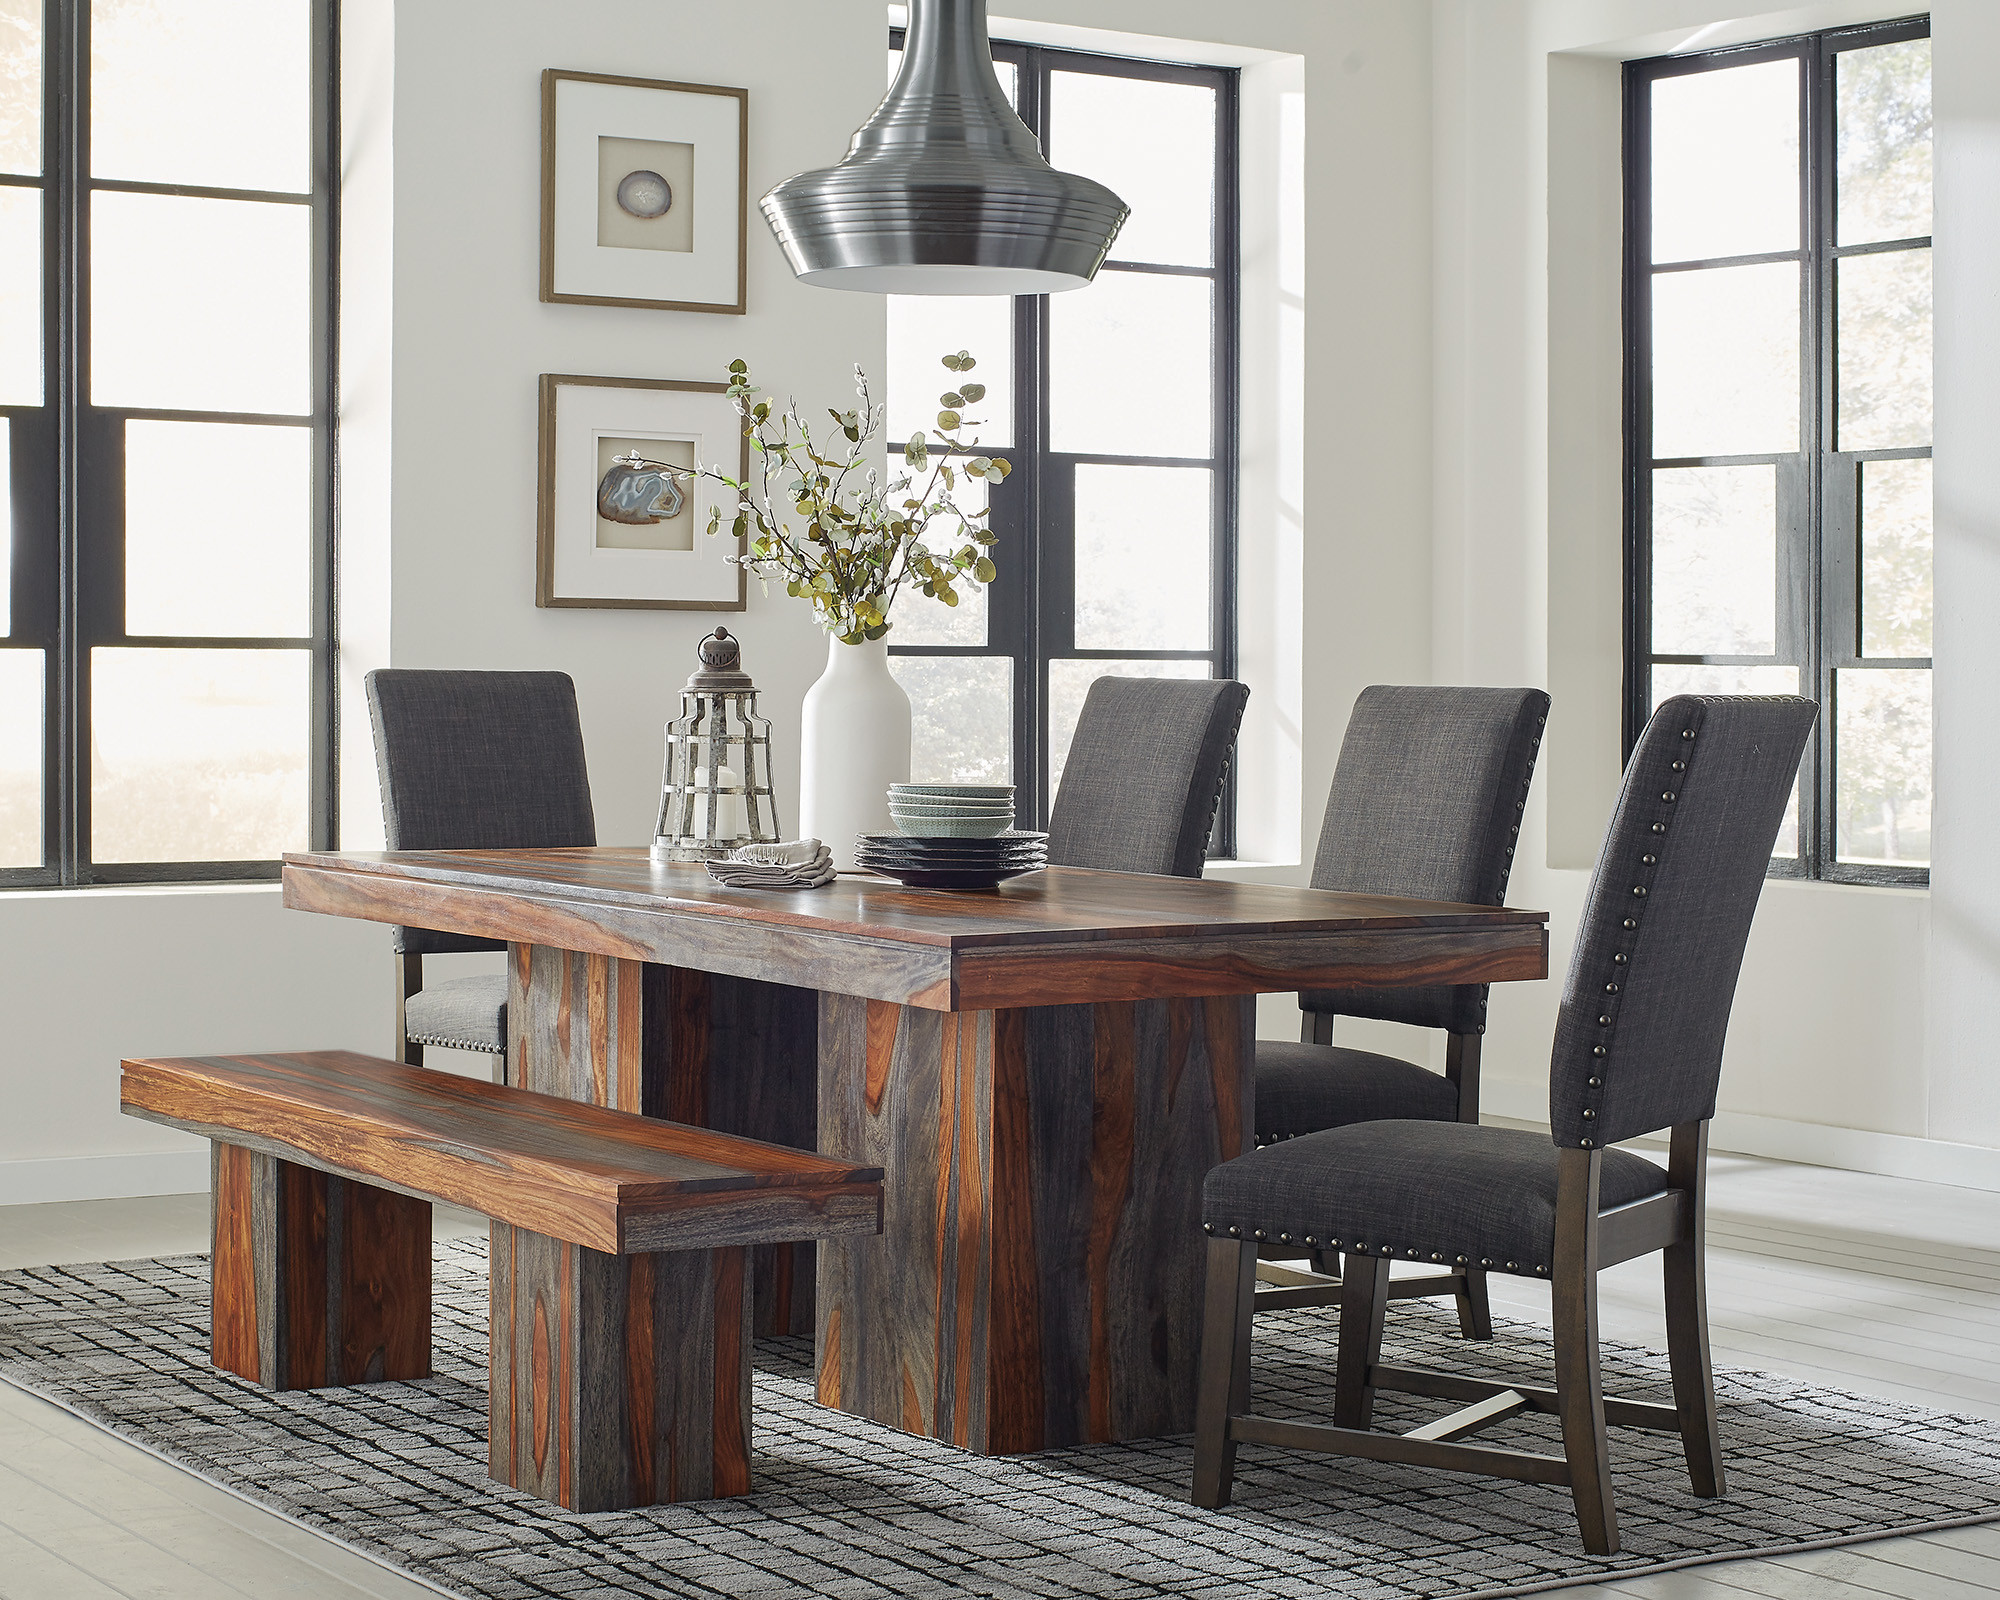 Rustic Kitchen Tables With Bench
 Binghamton Rustic Dining Table Set with Bench color option